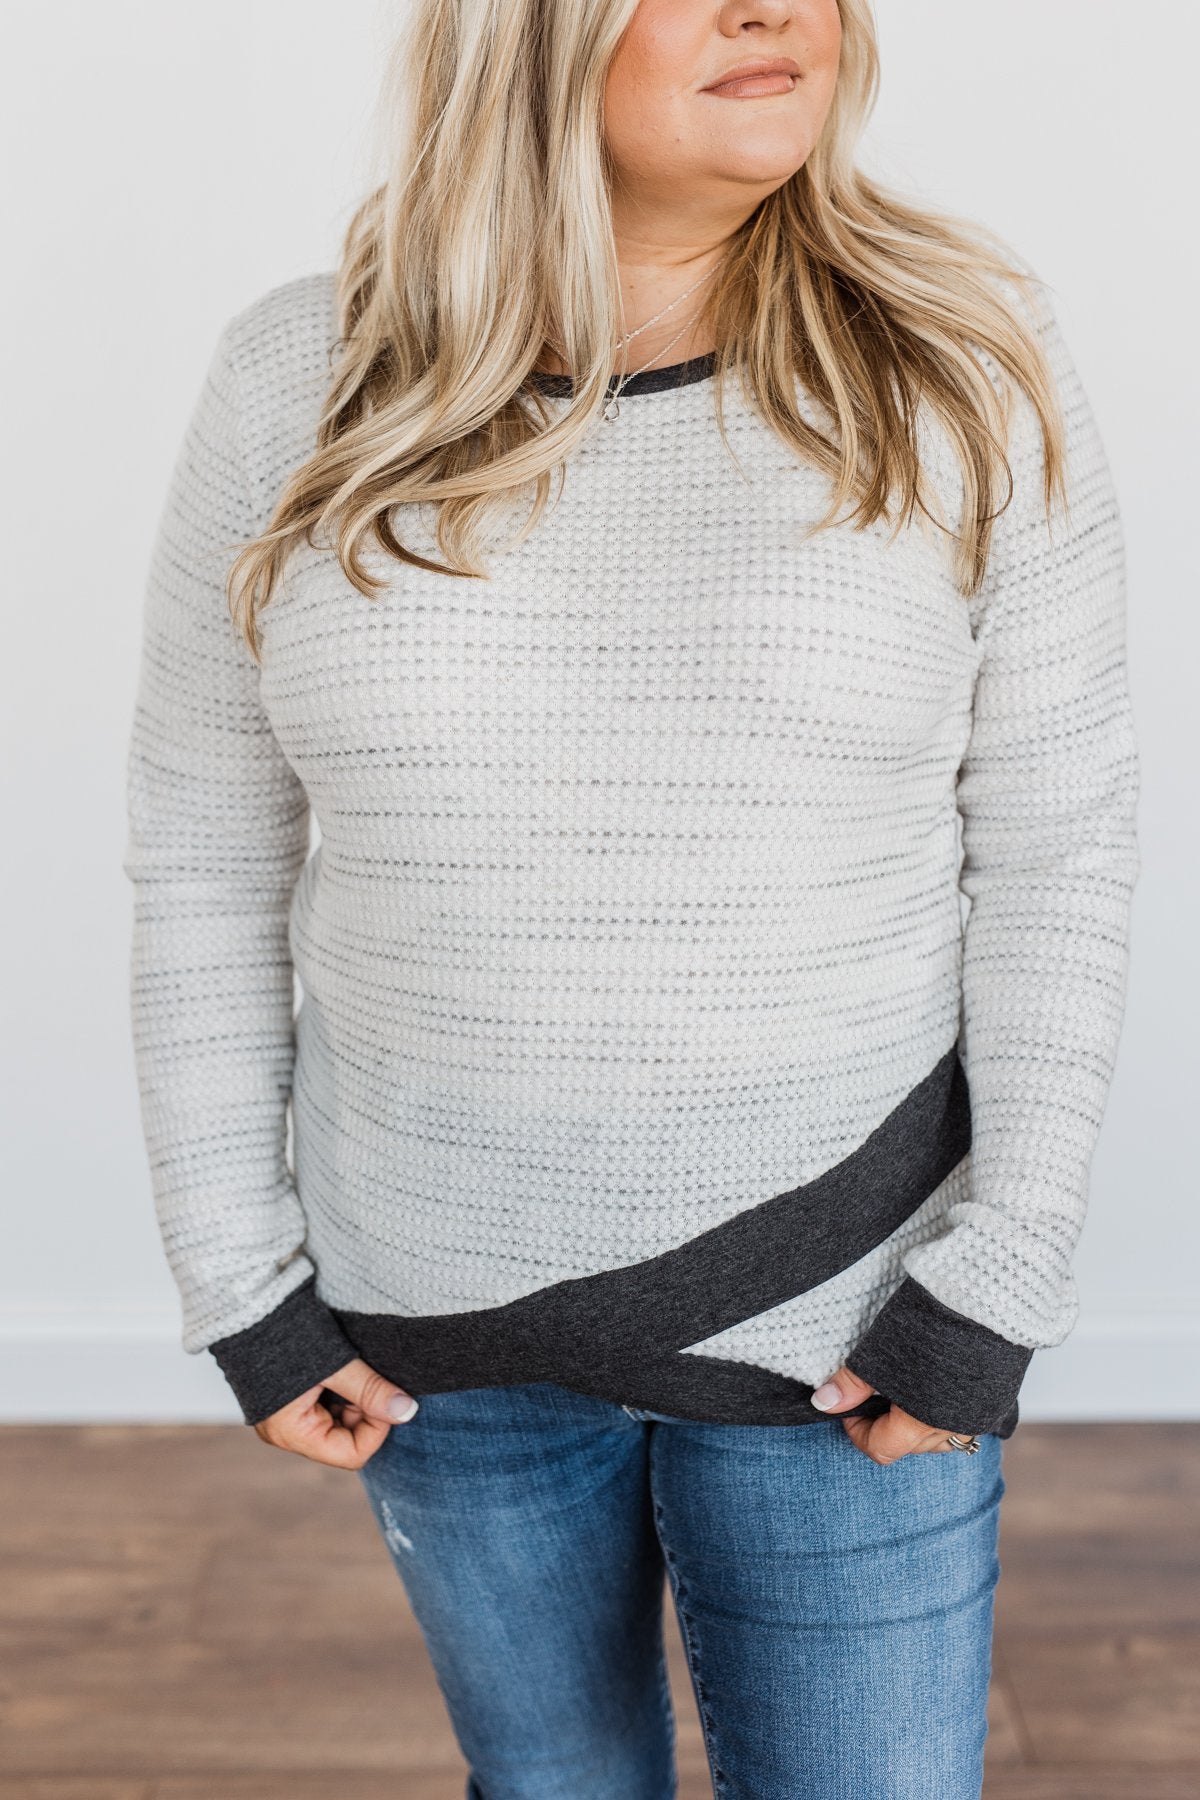 Autumn Days Are Here To Stay Waffle Knit Top- Ivory